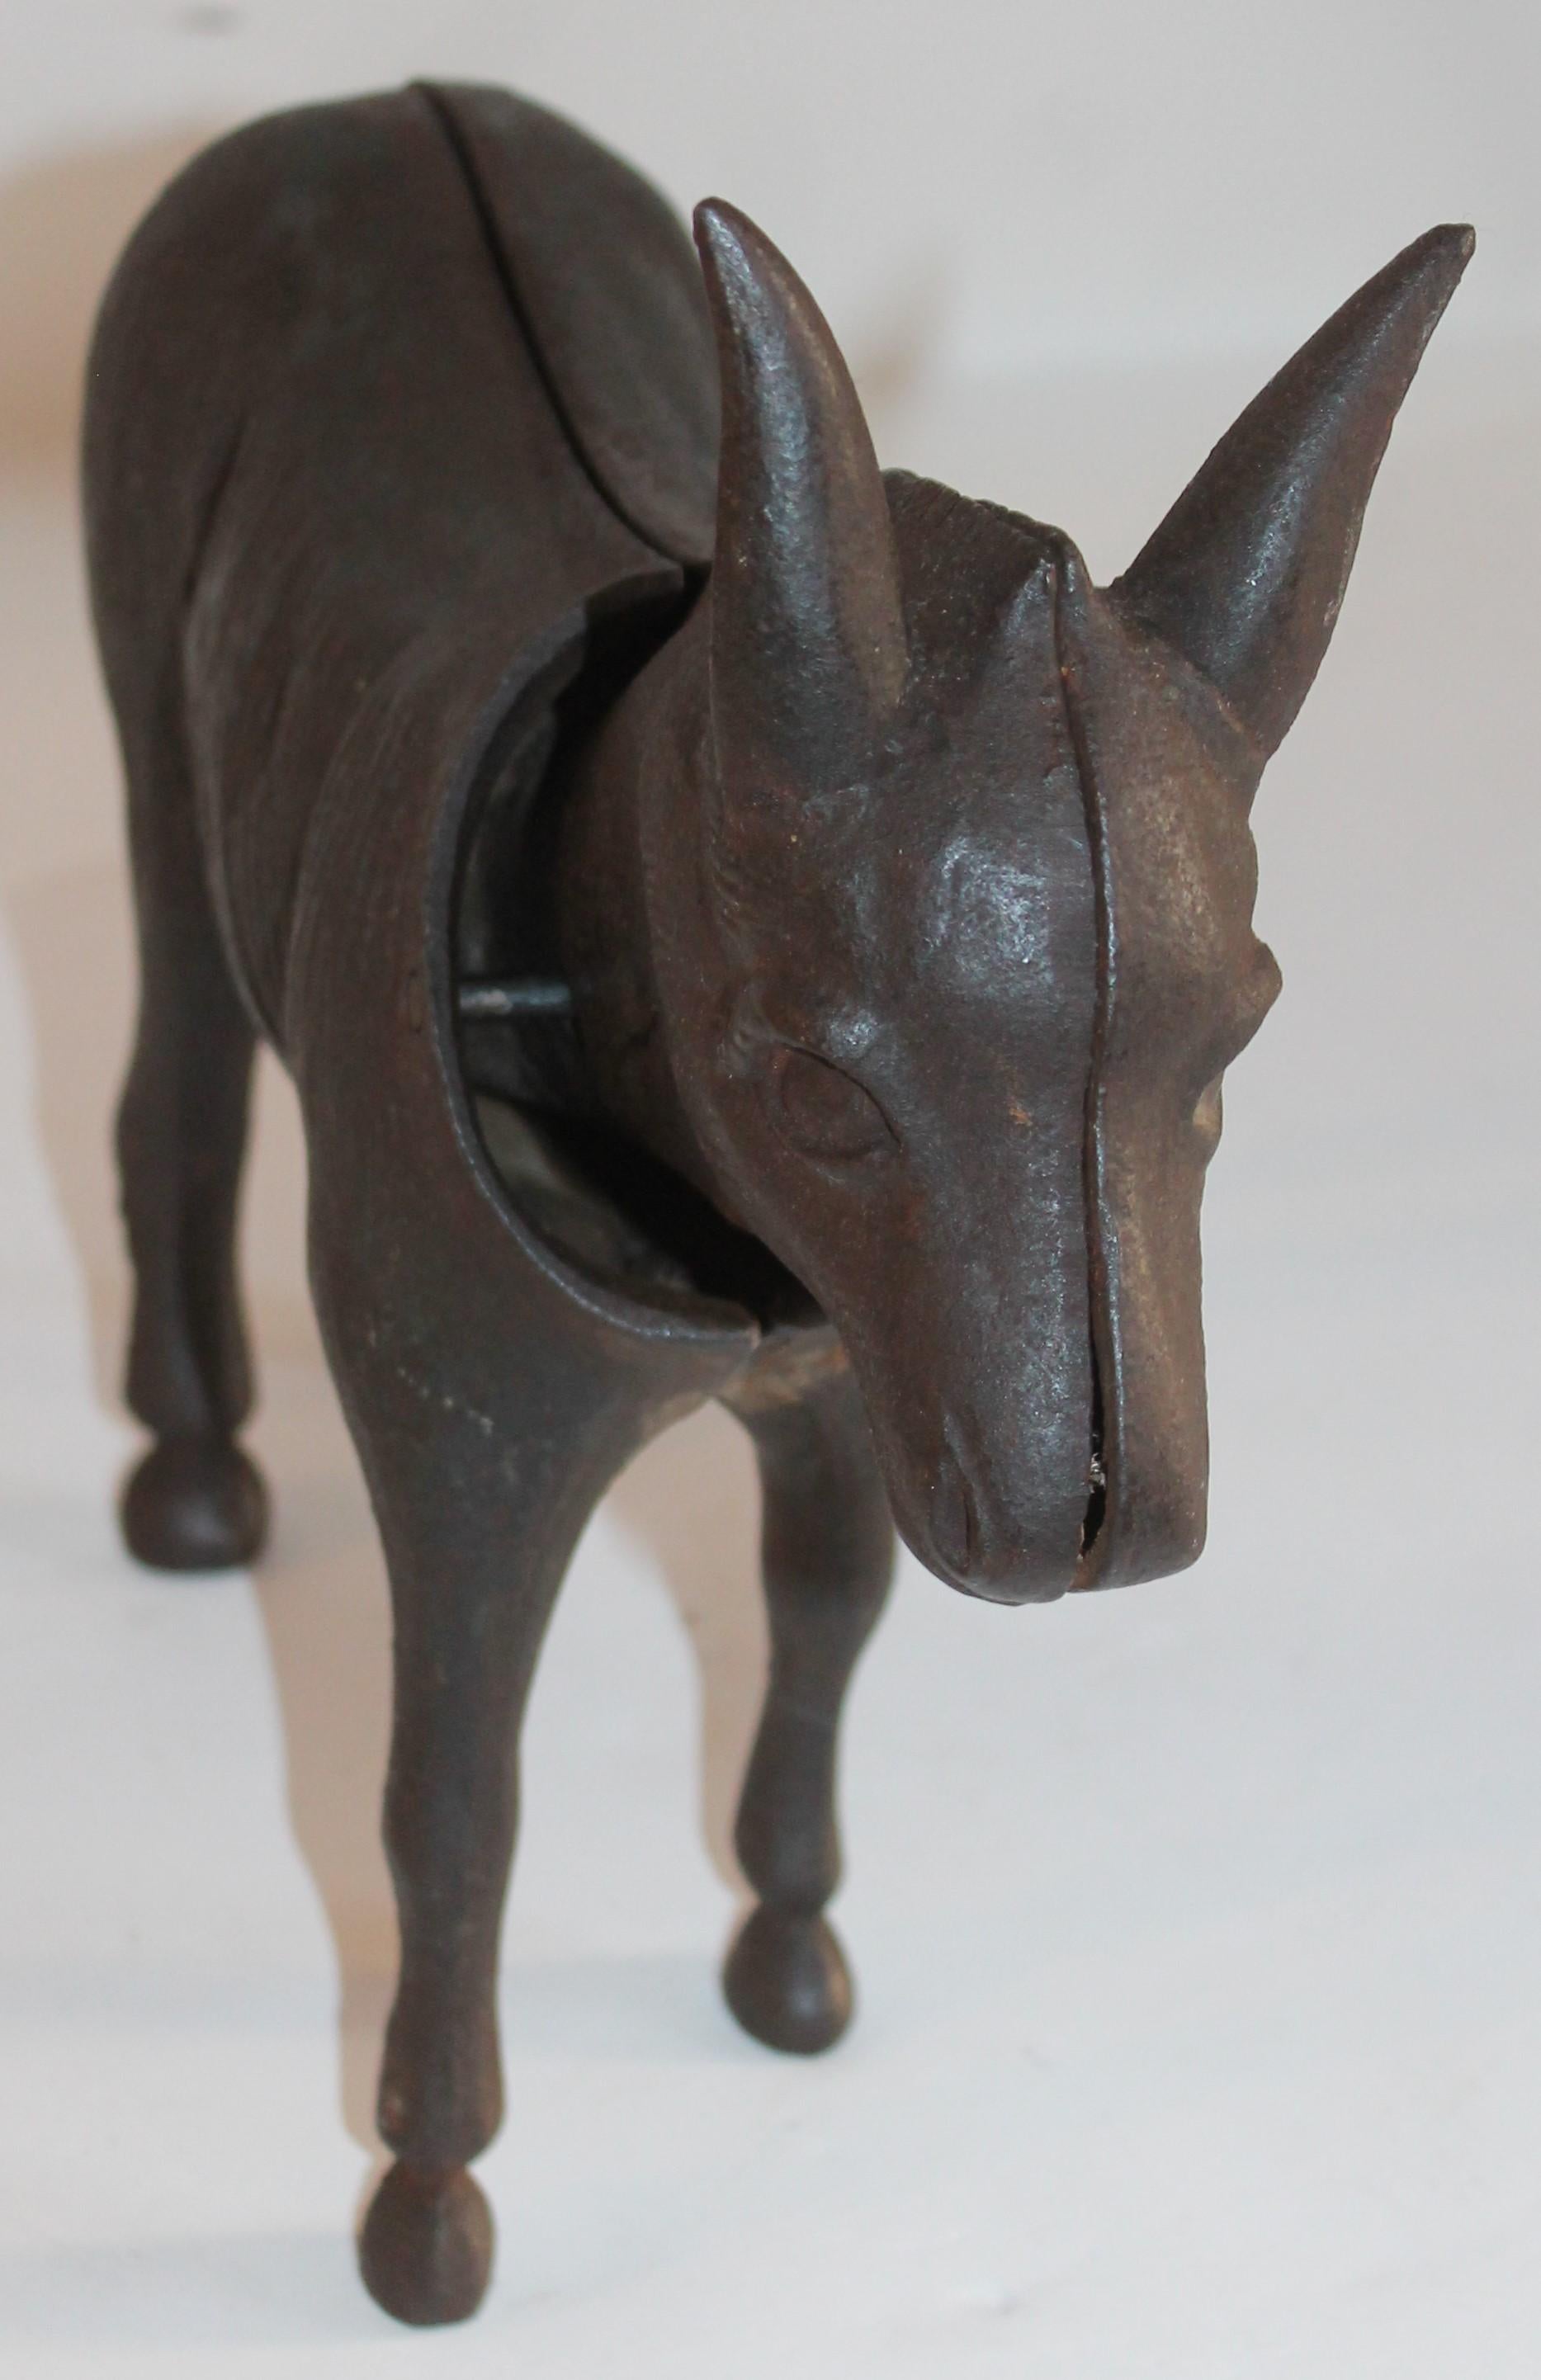 This folky and heavy donkey door stop is in fine condition and in working order. The head bobs back and forth when moved. It has a wonderful untouched patina.